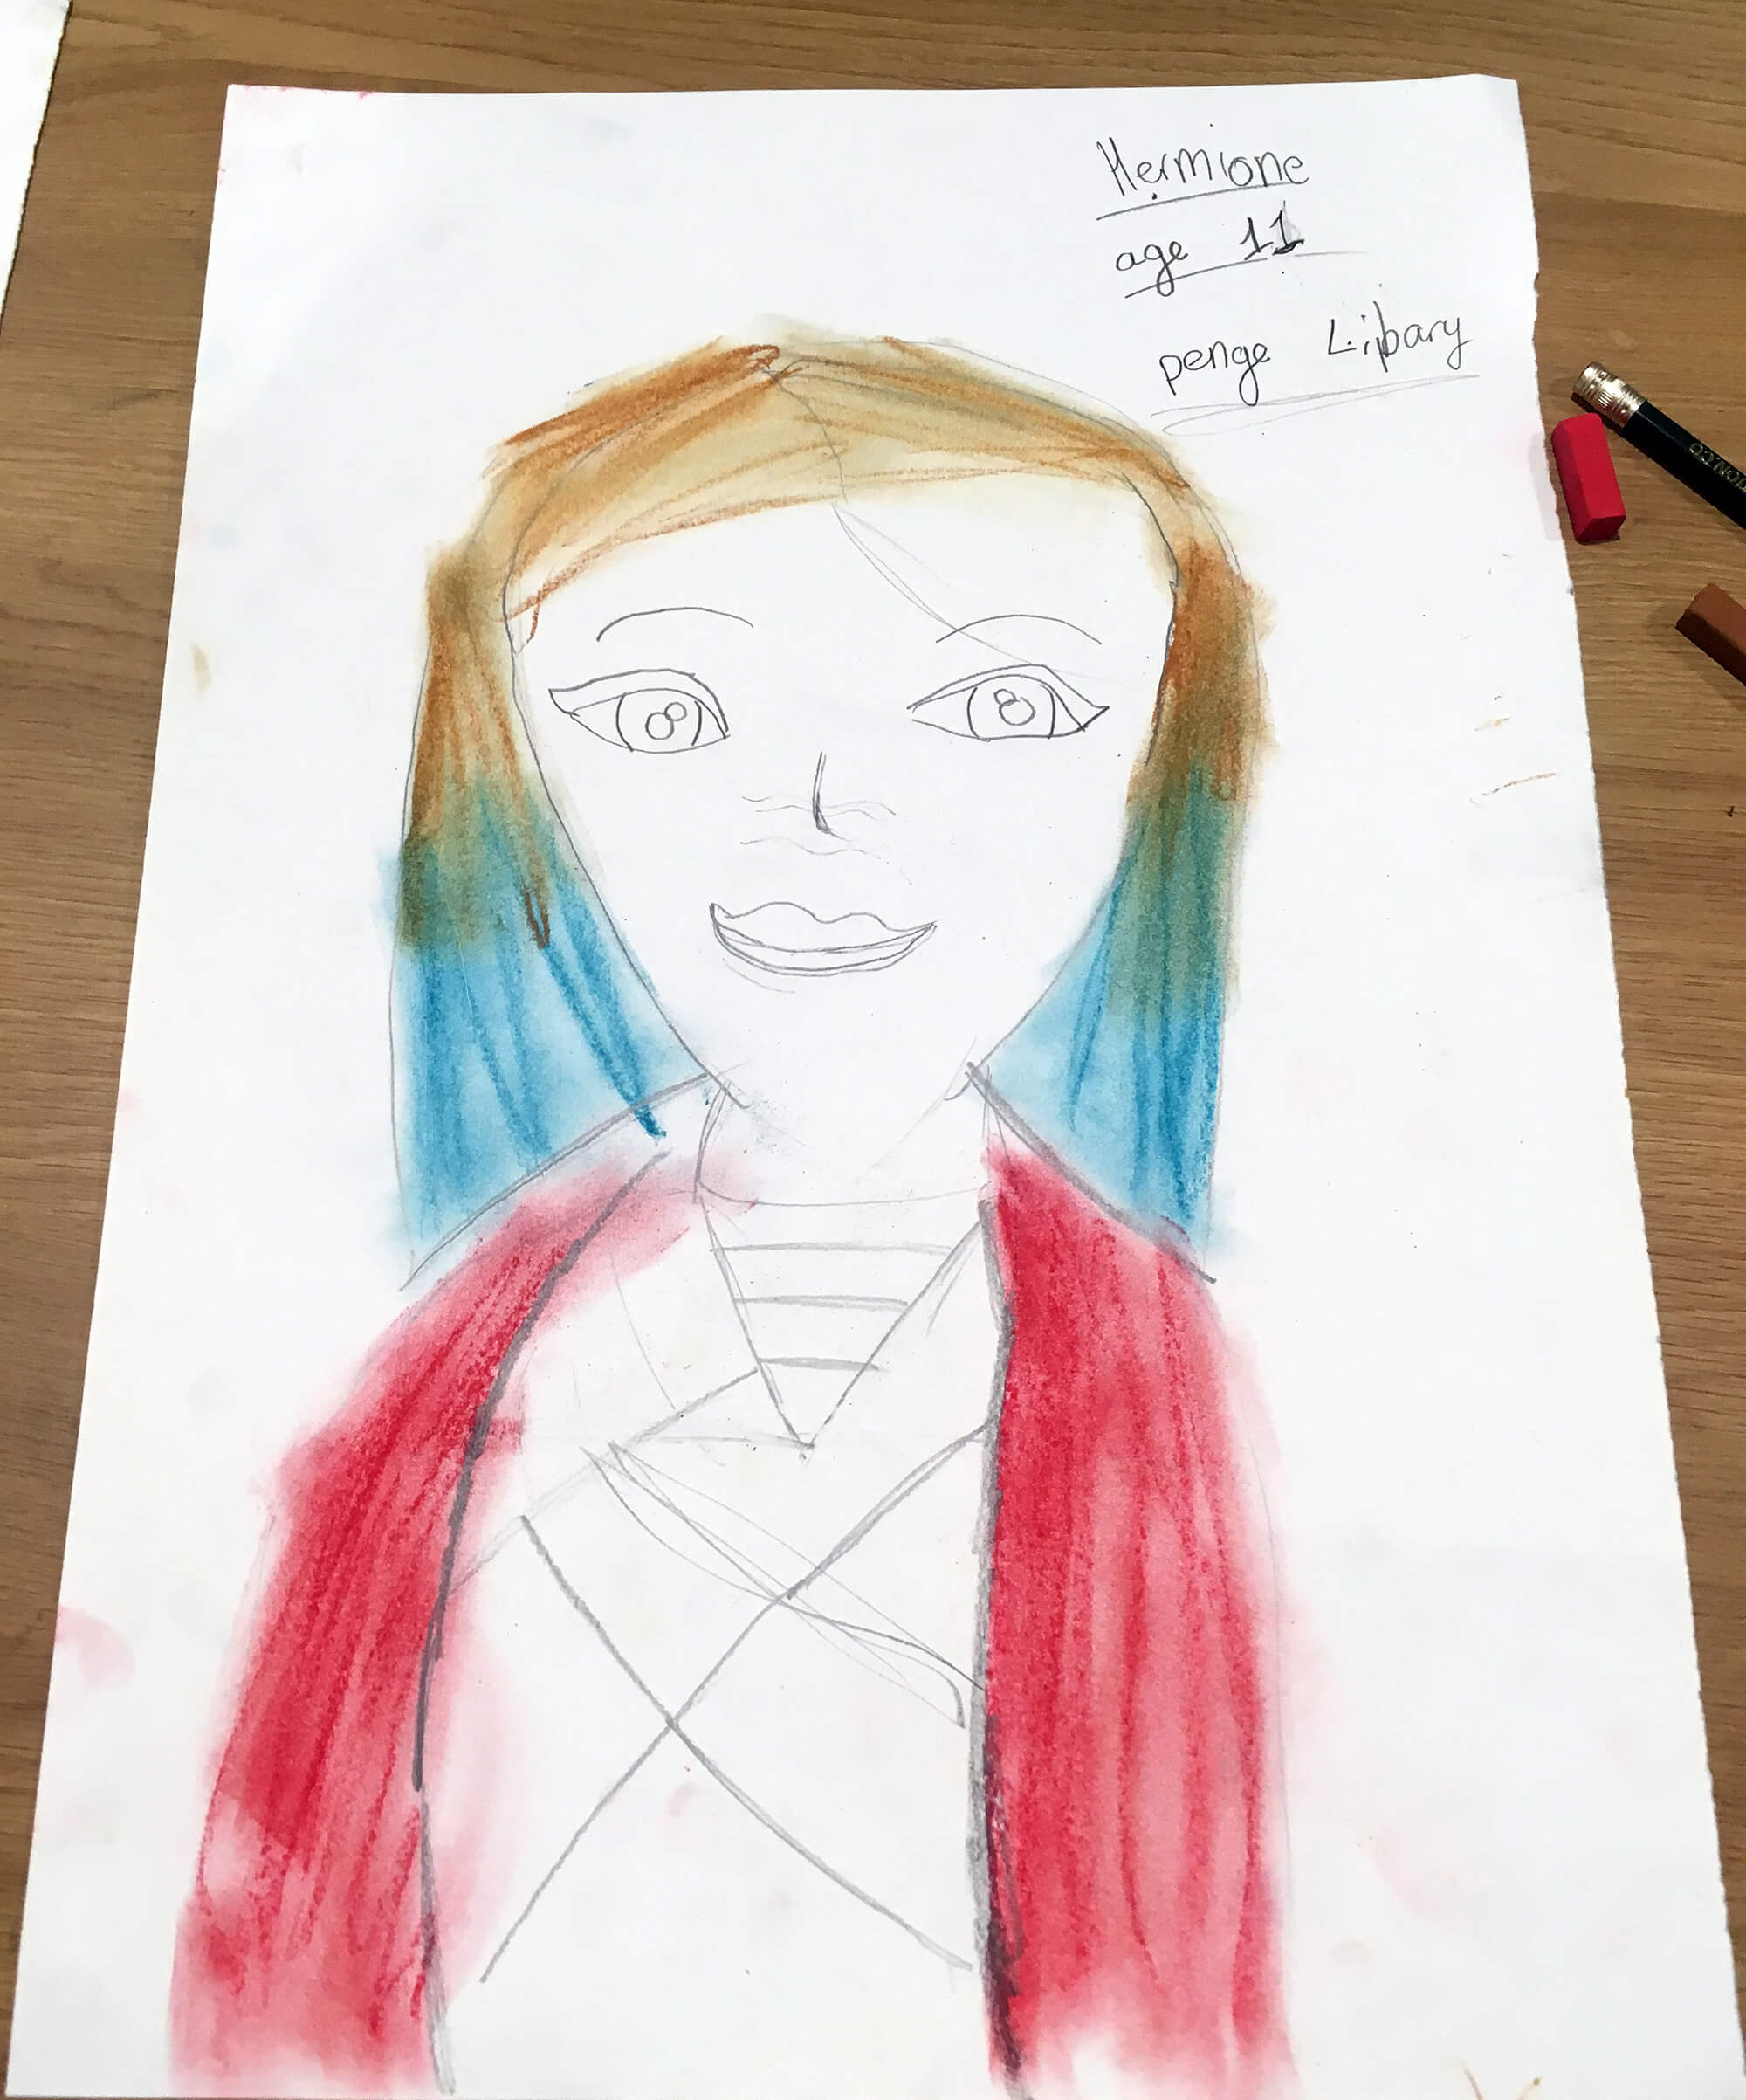 Lisa by Hermione, aged 11